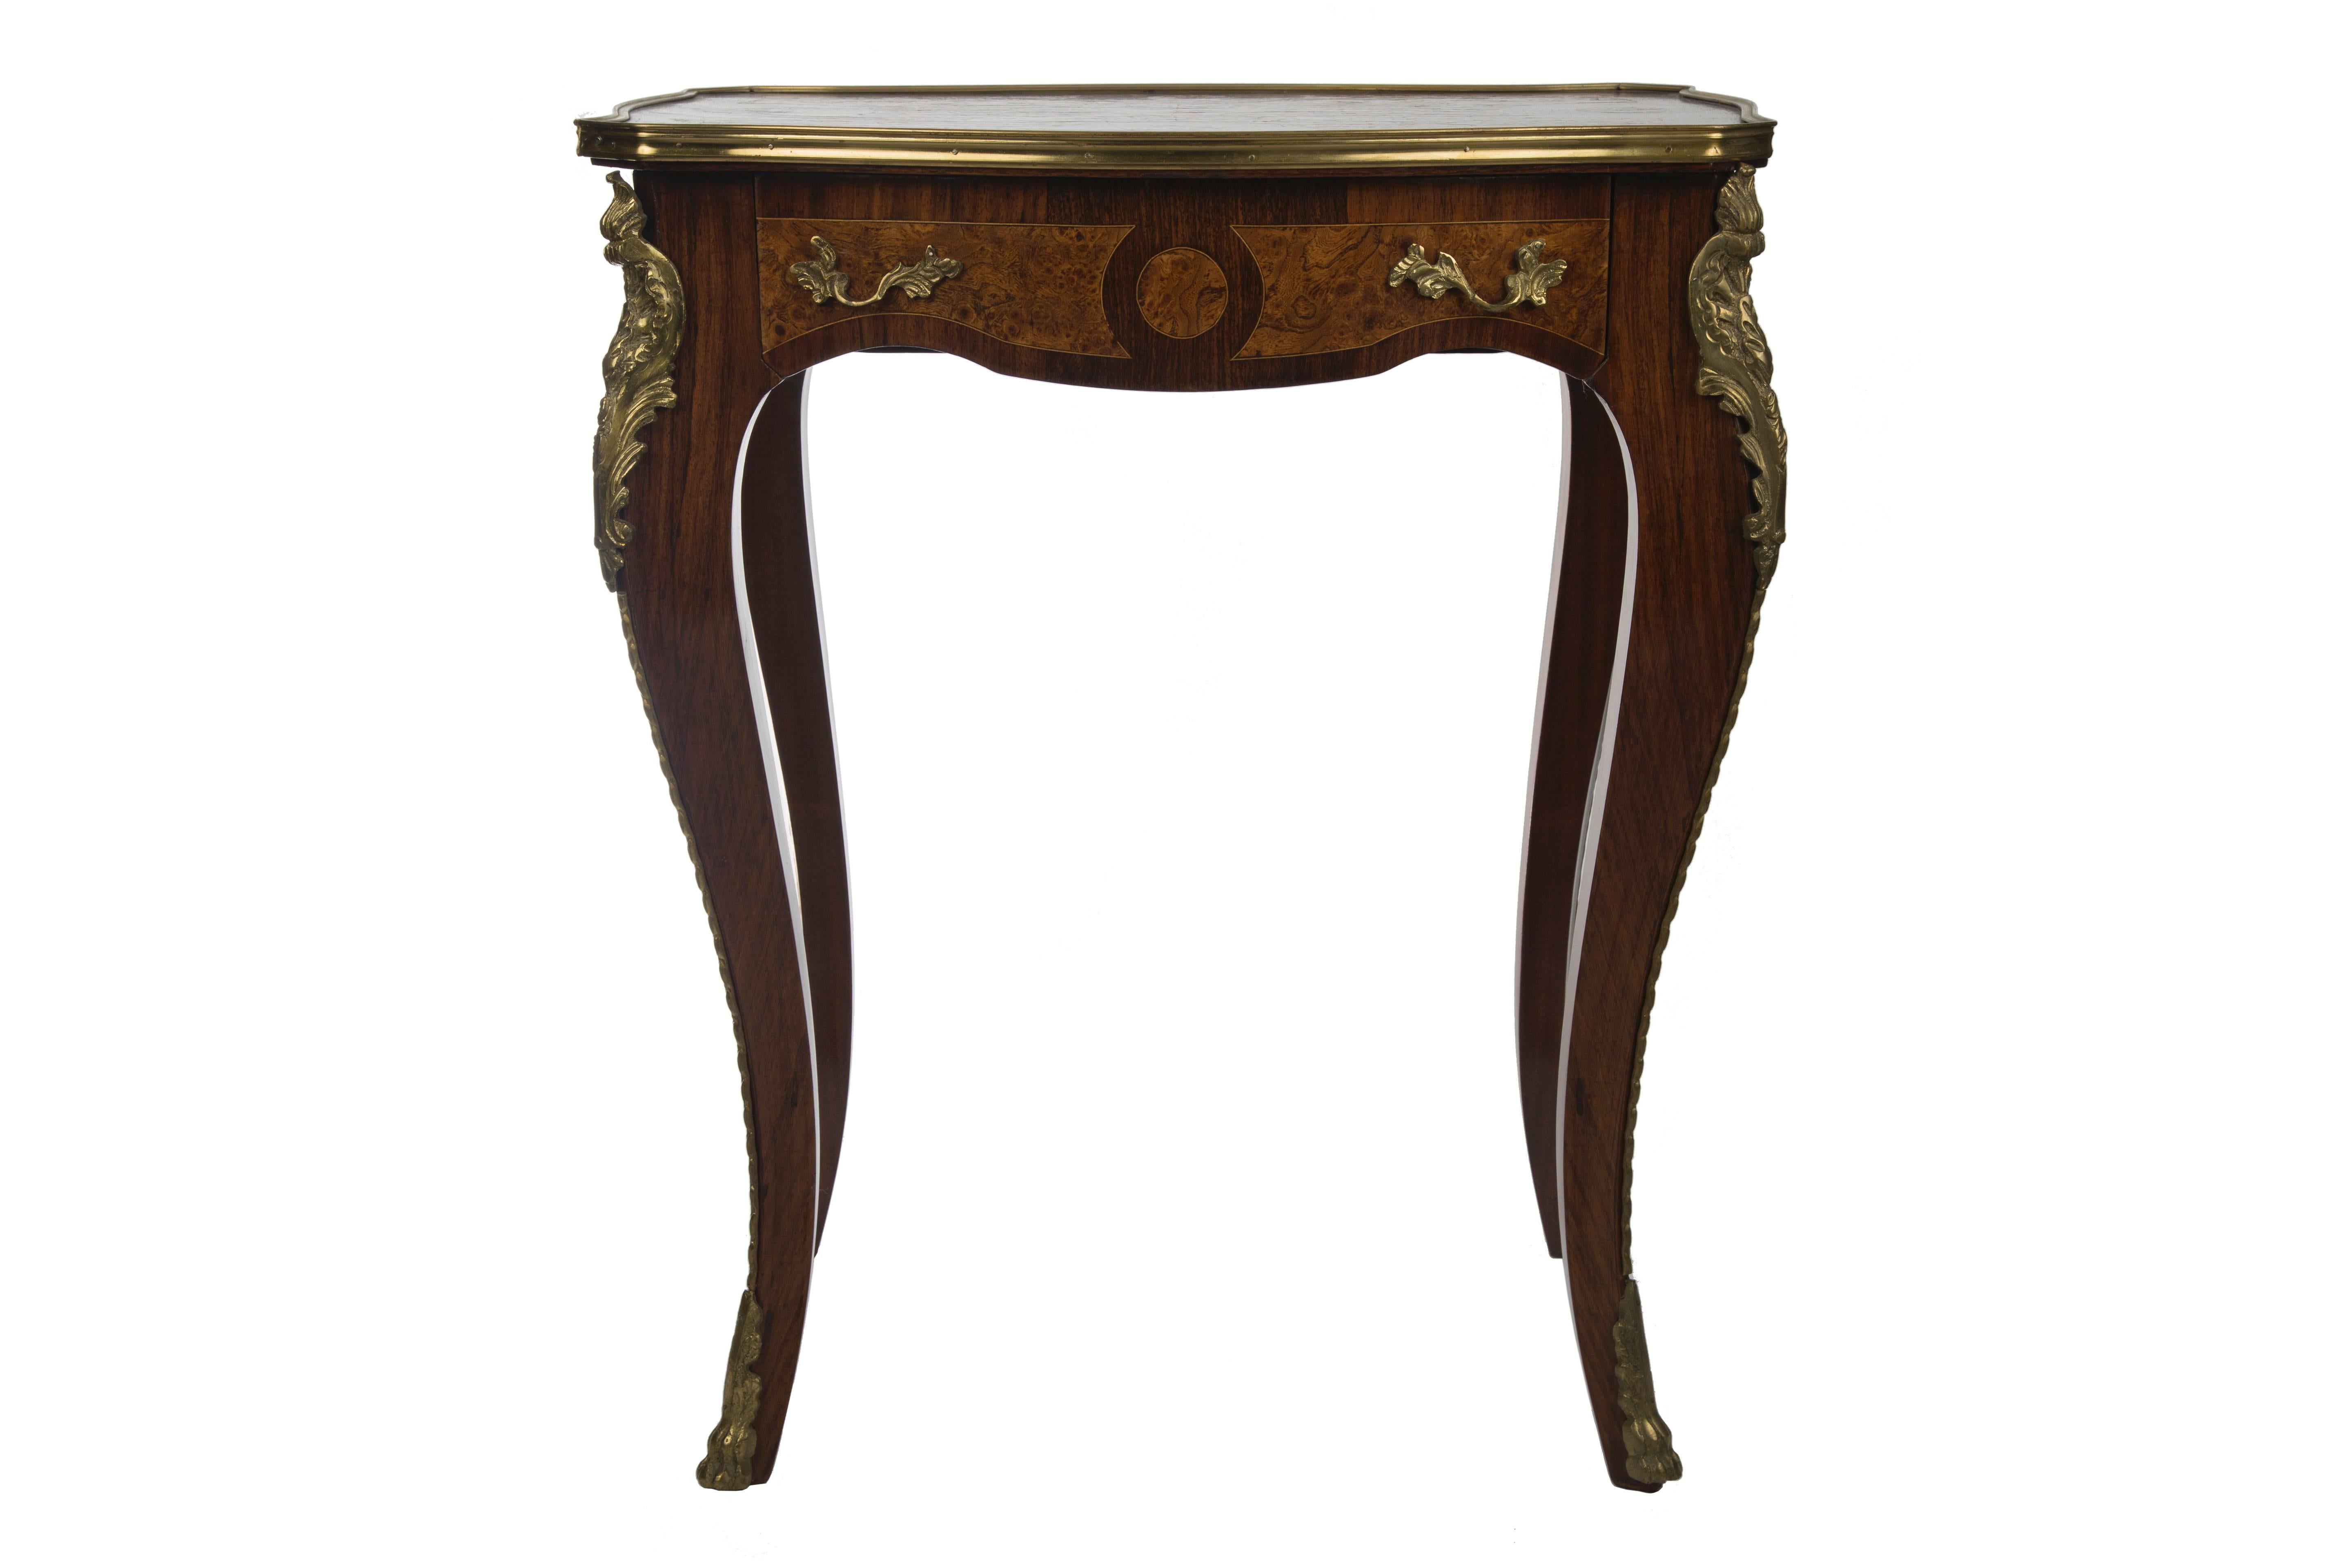 Pair of gilt bronze-mounted veneered fruitwood marquetry inlay tables with single drawer. France, 19th century.
 